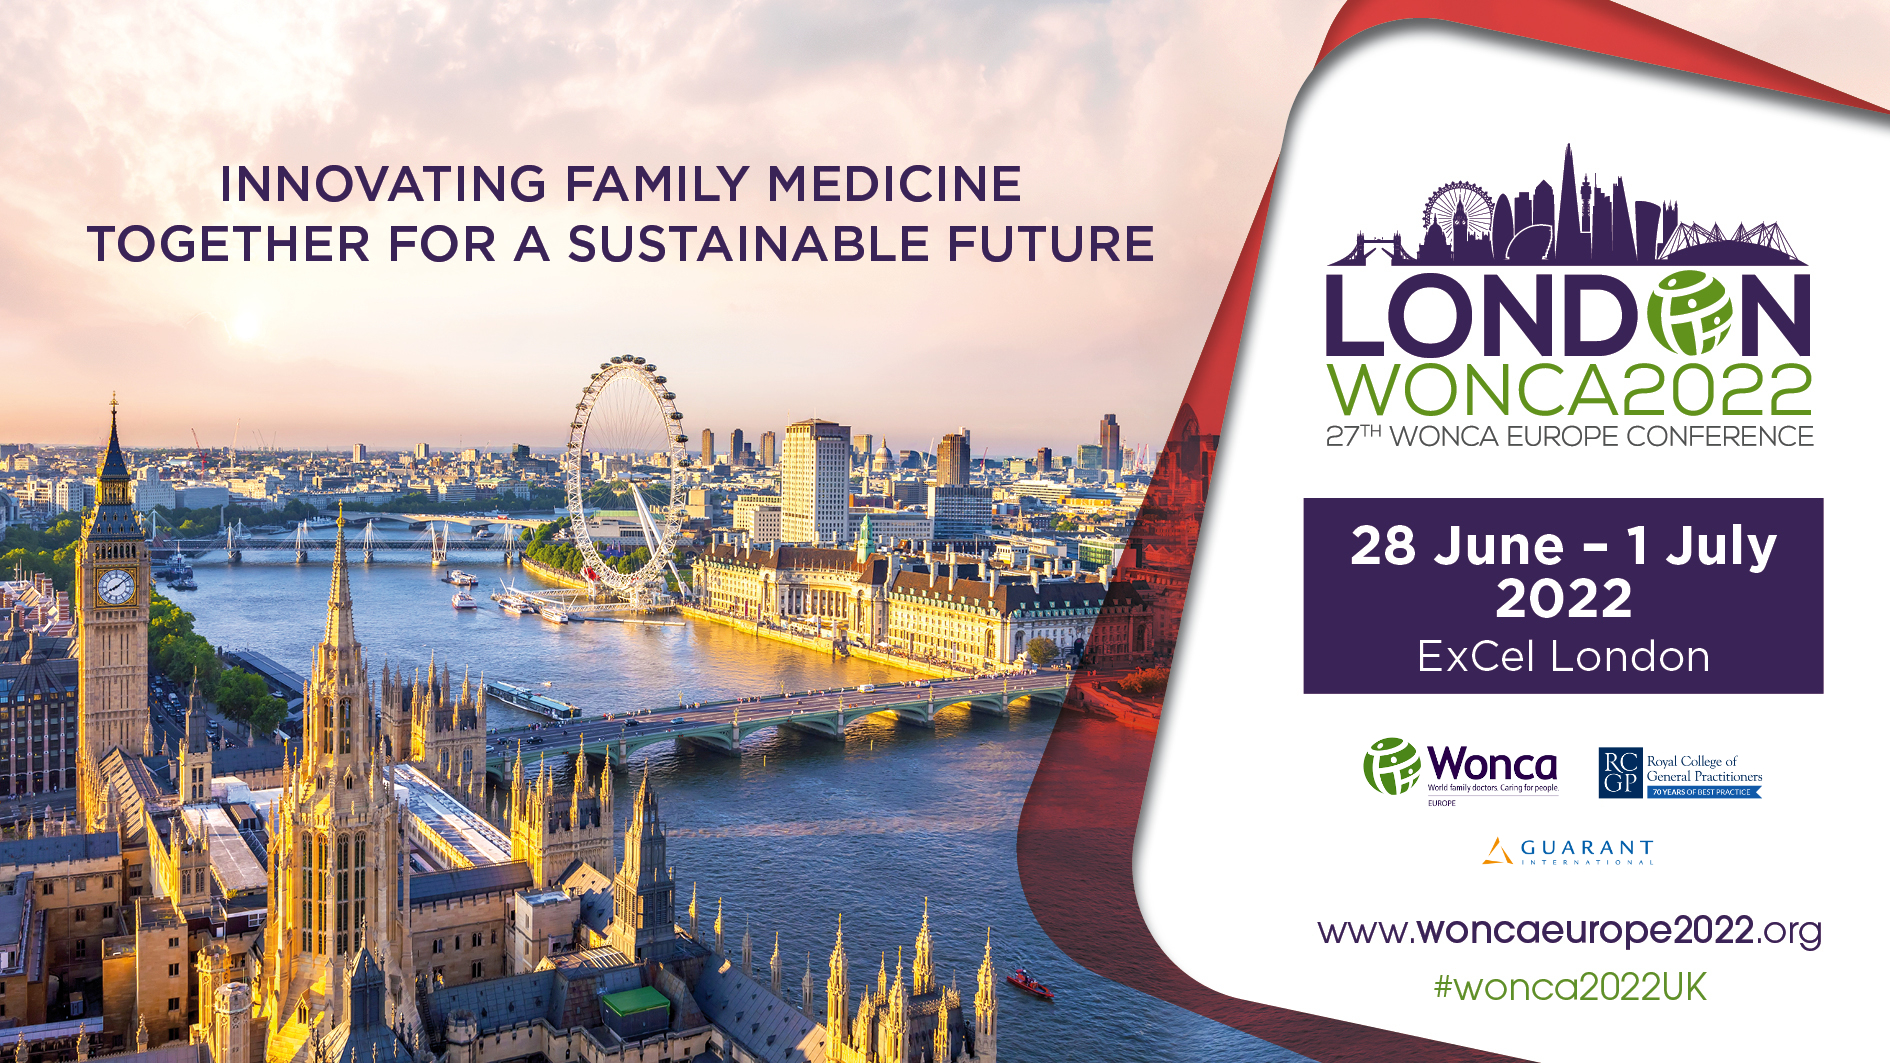 27th WONCA Europe conference